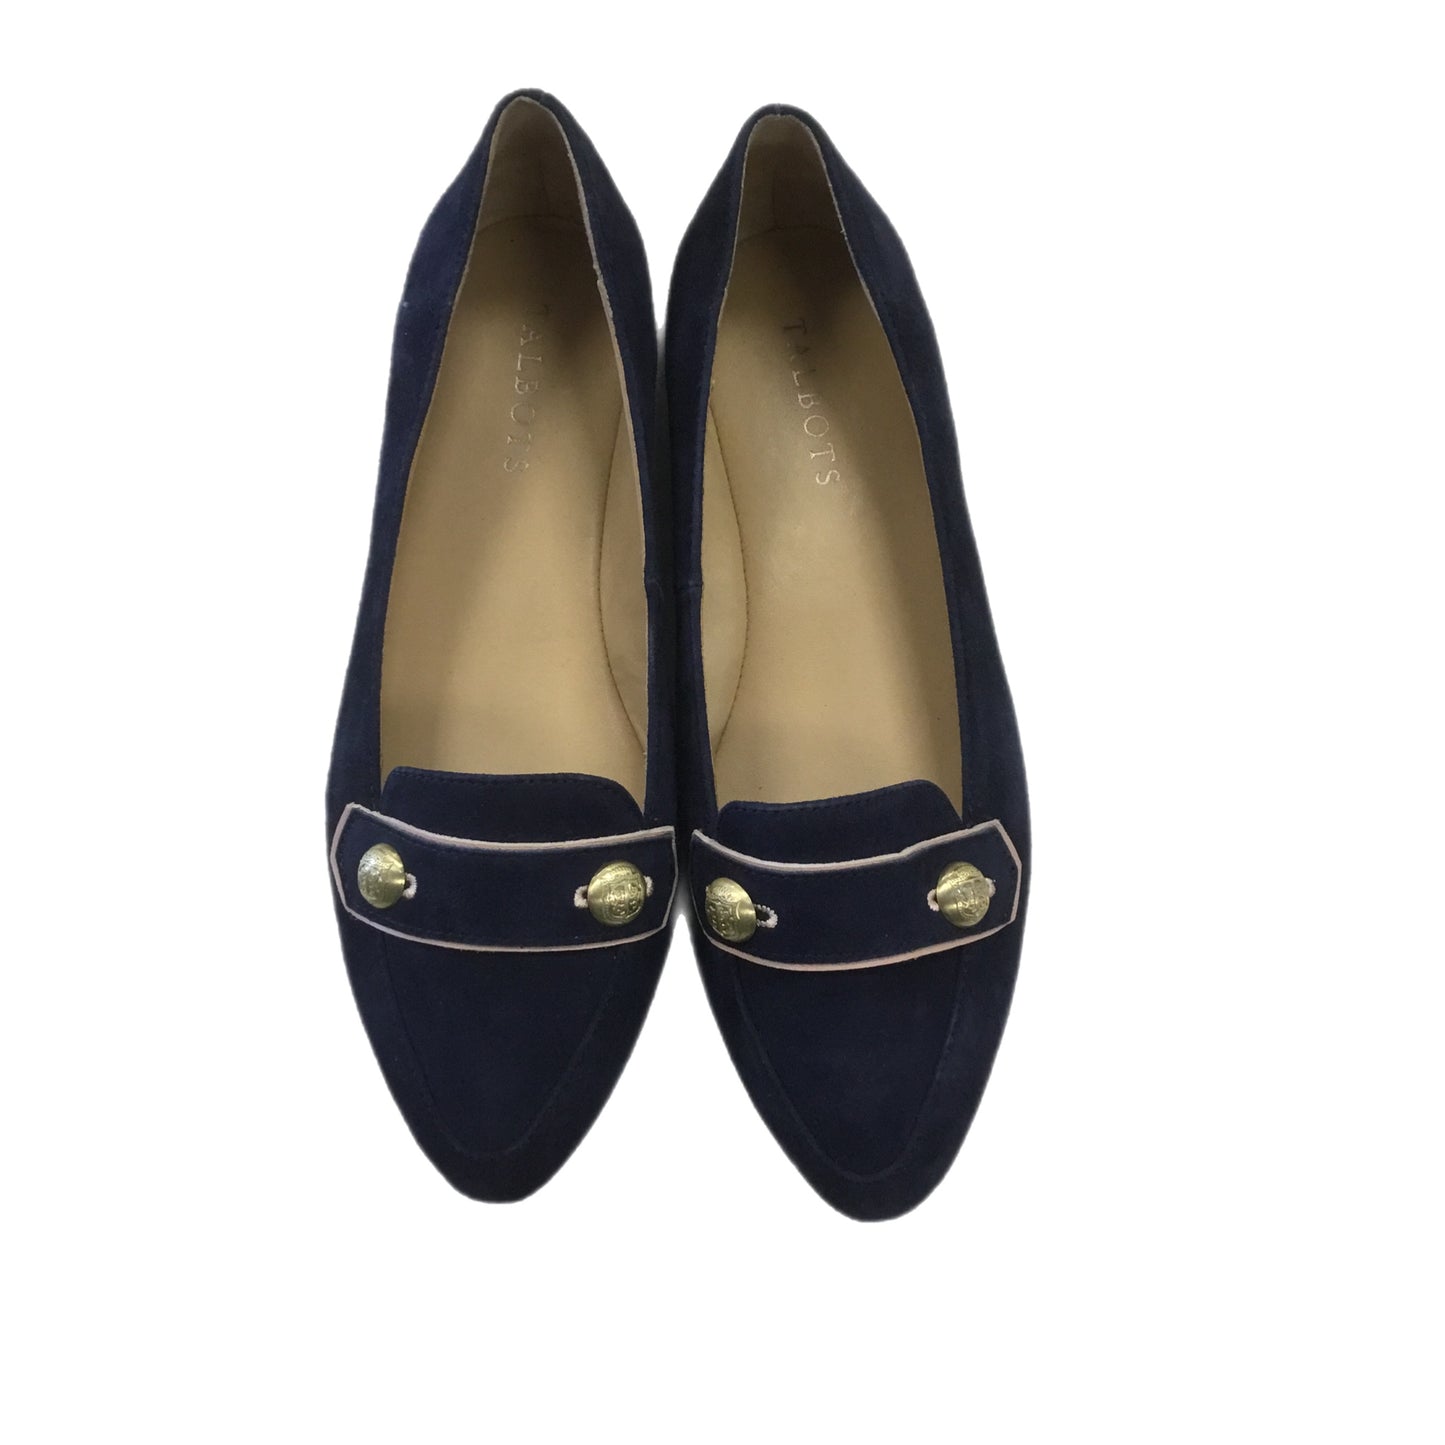 Shoes Flats D Orsay By Talbots  Size: 6.5